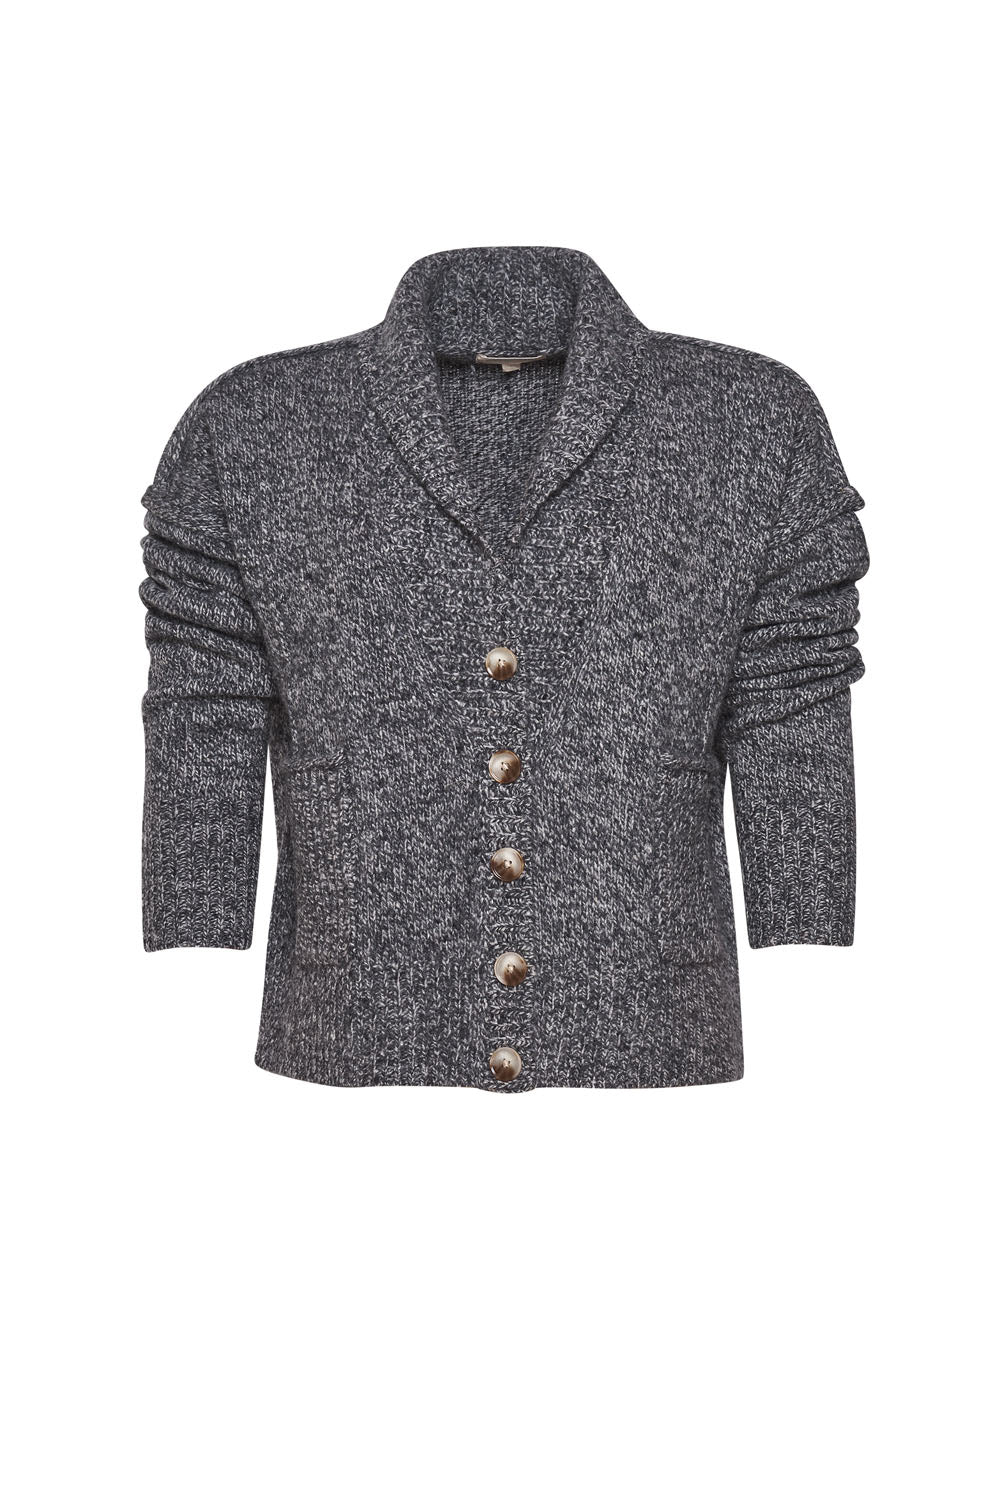 Madly Sweetly - Miss Mossy Cardi (Charcoal)